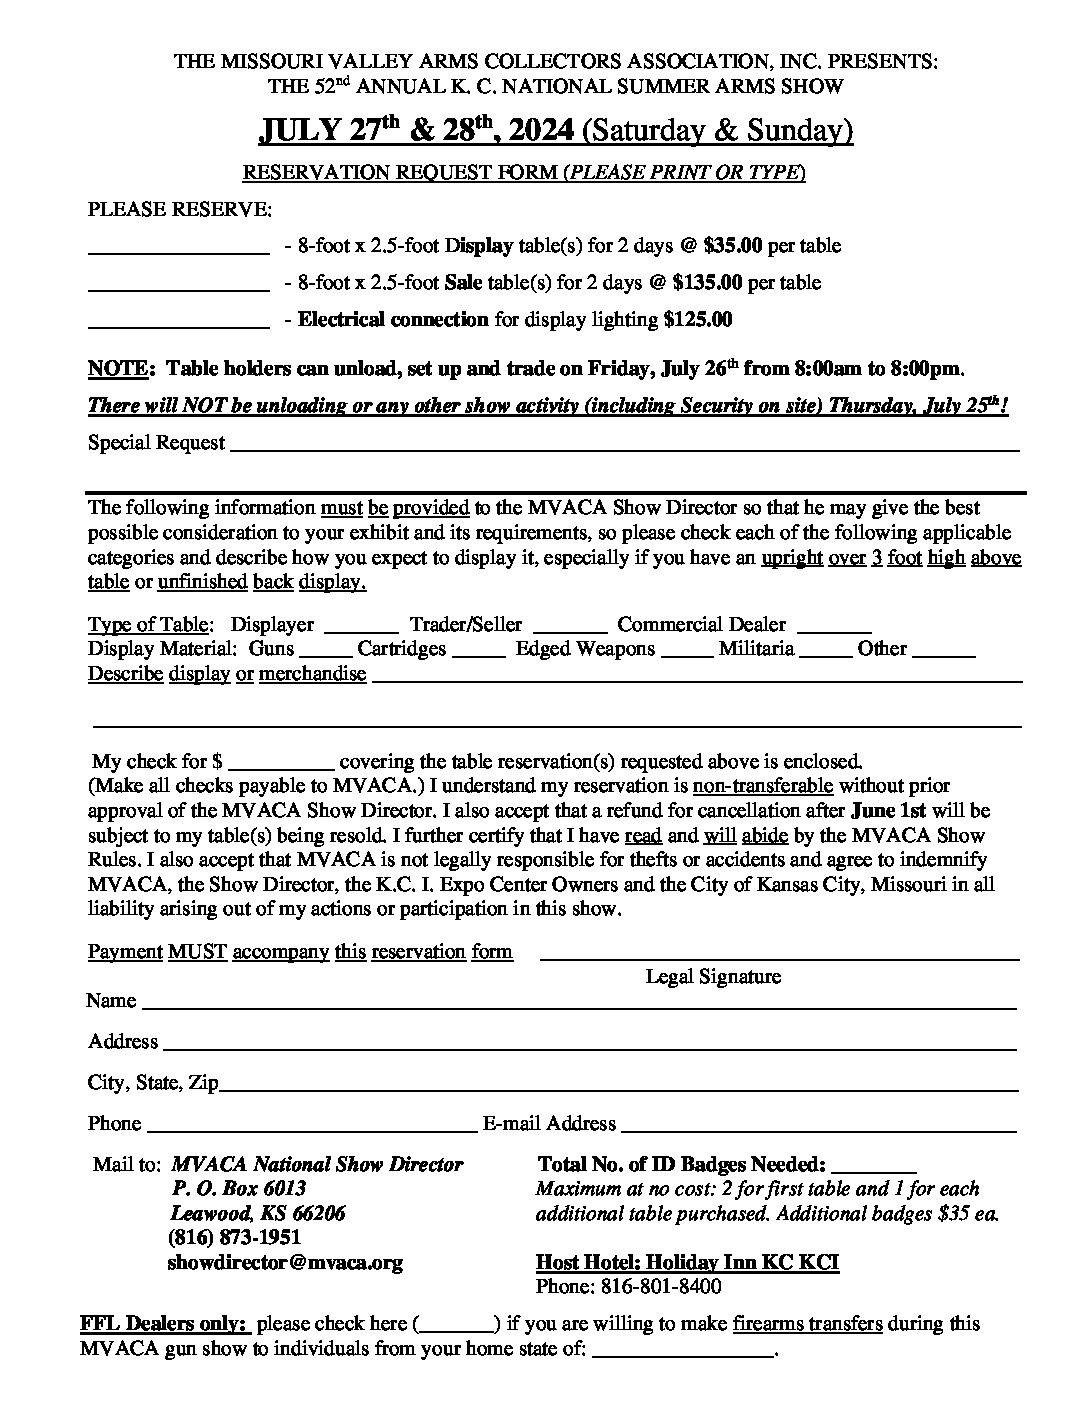 2024 Reservation Form The Missouri Valley Arms Collectors Association